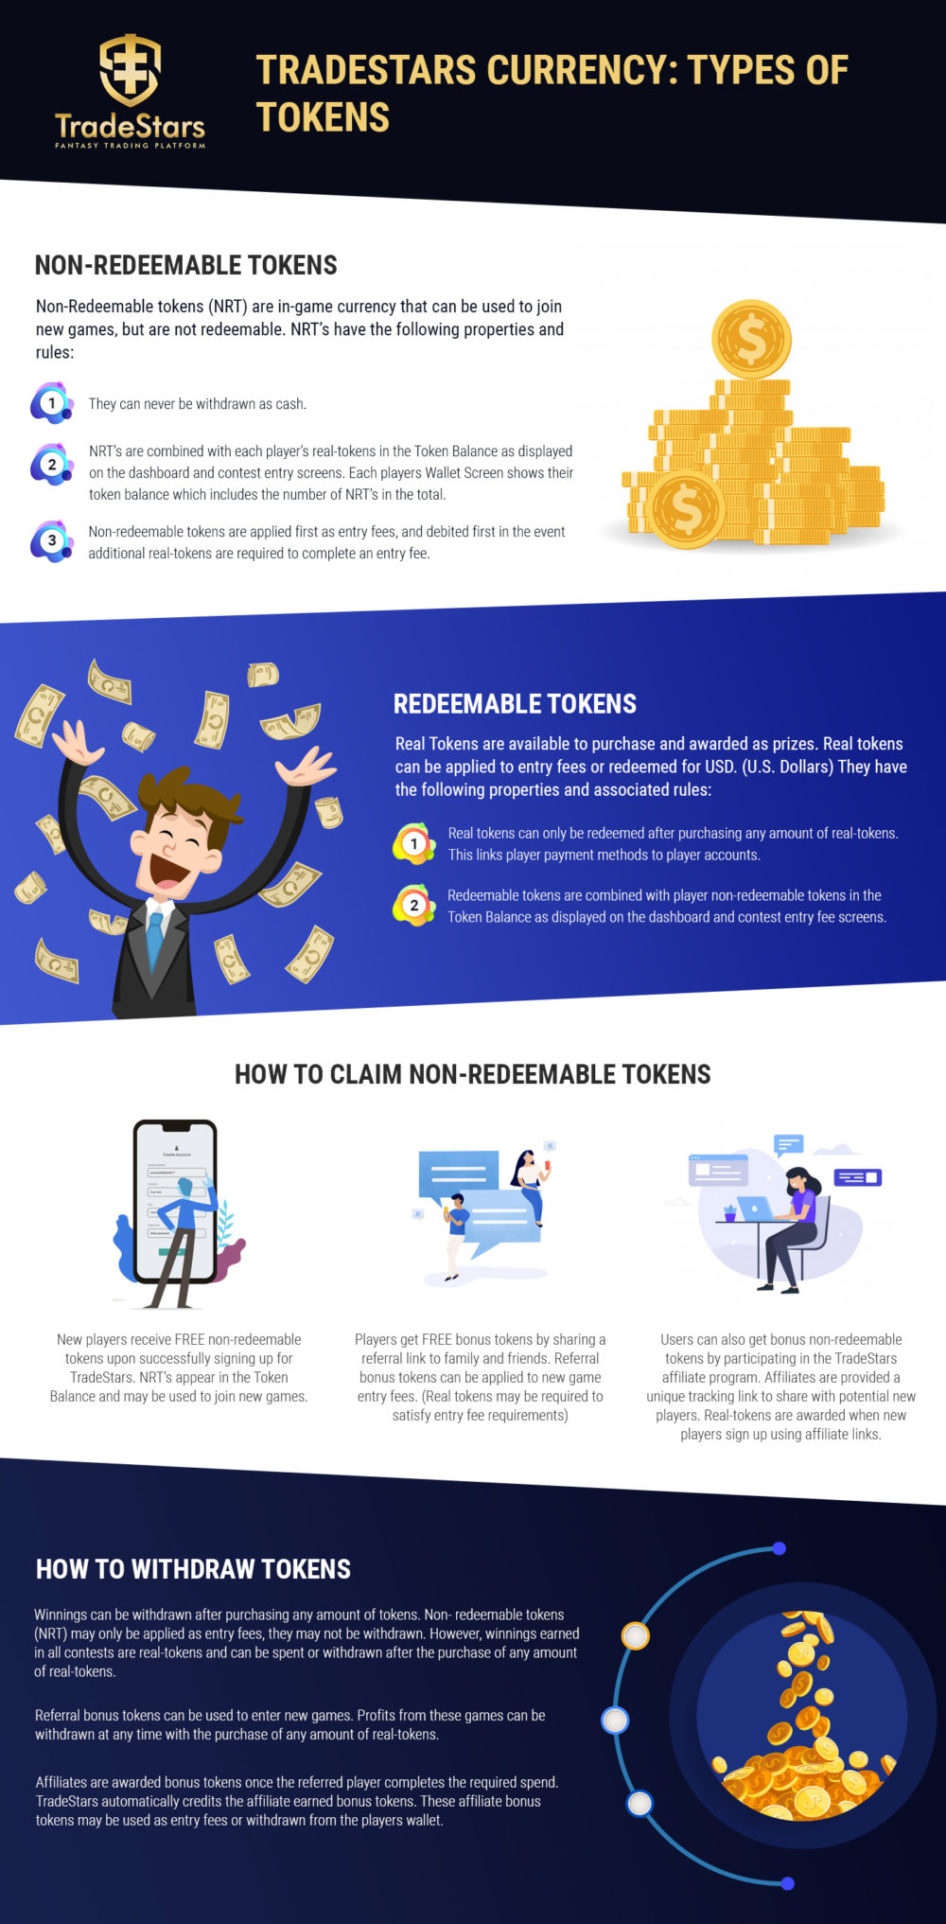 TradeStars Currency: Types of Tokens